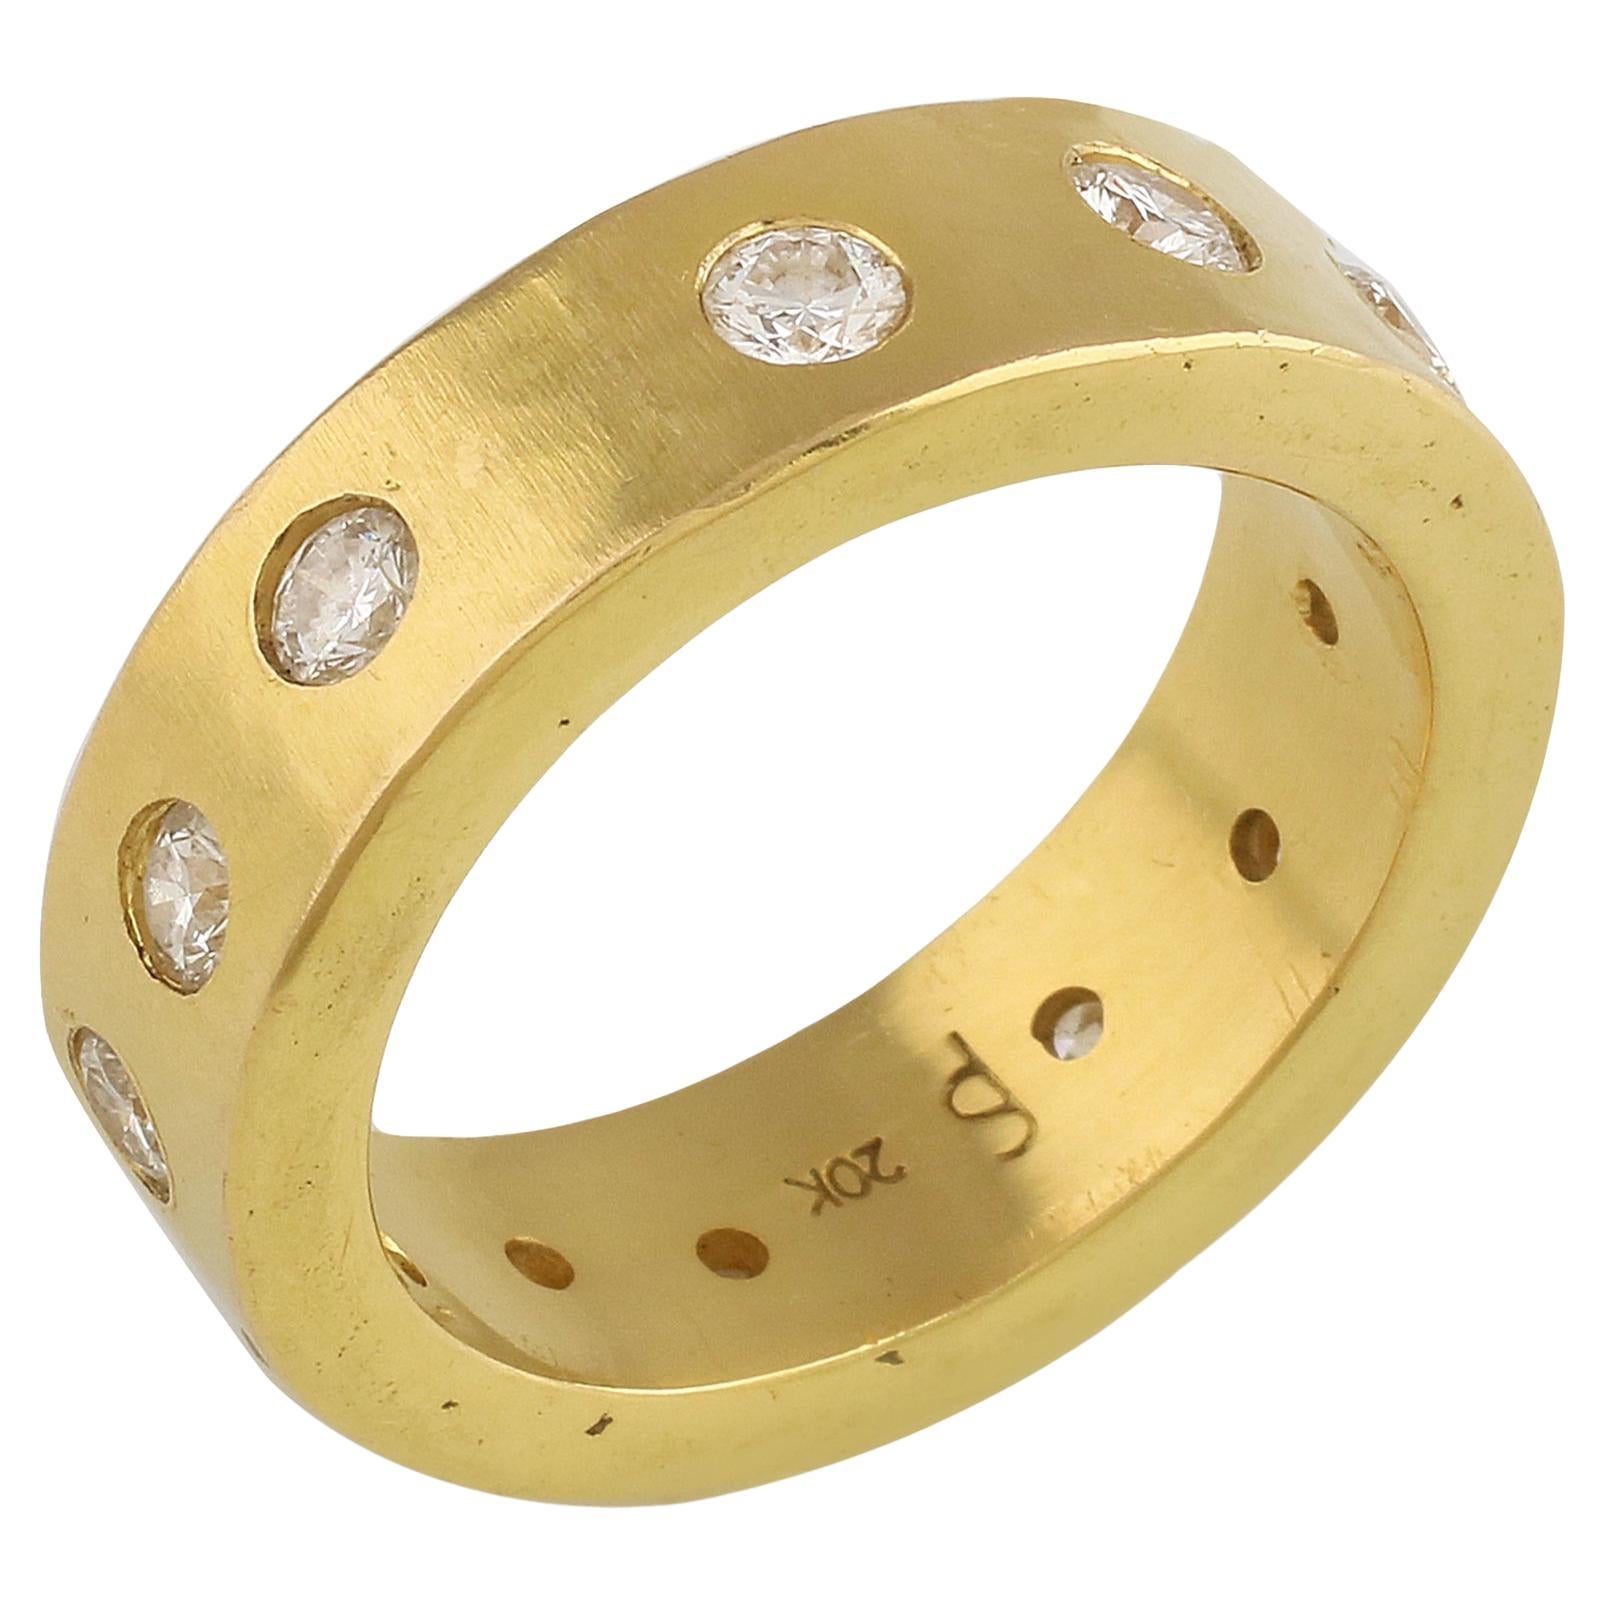 For Sale:  PHILIPPE SPENCER 20K Gold Hand-Forged Men's Ring and 2.16 Ct. Colorless Diamonds